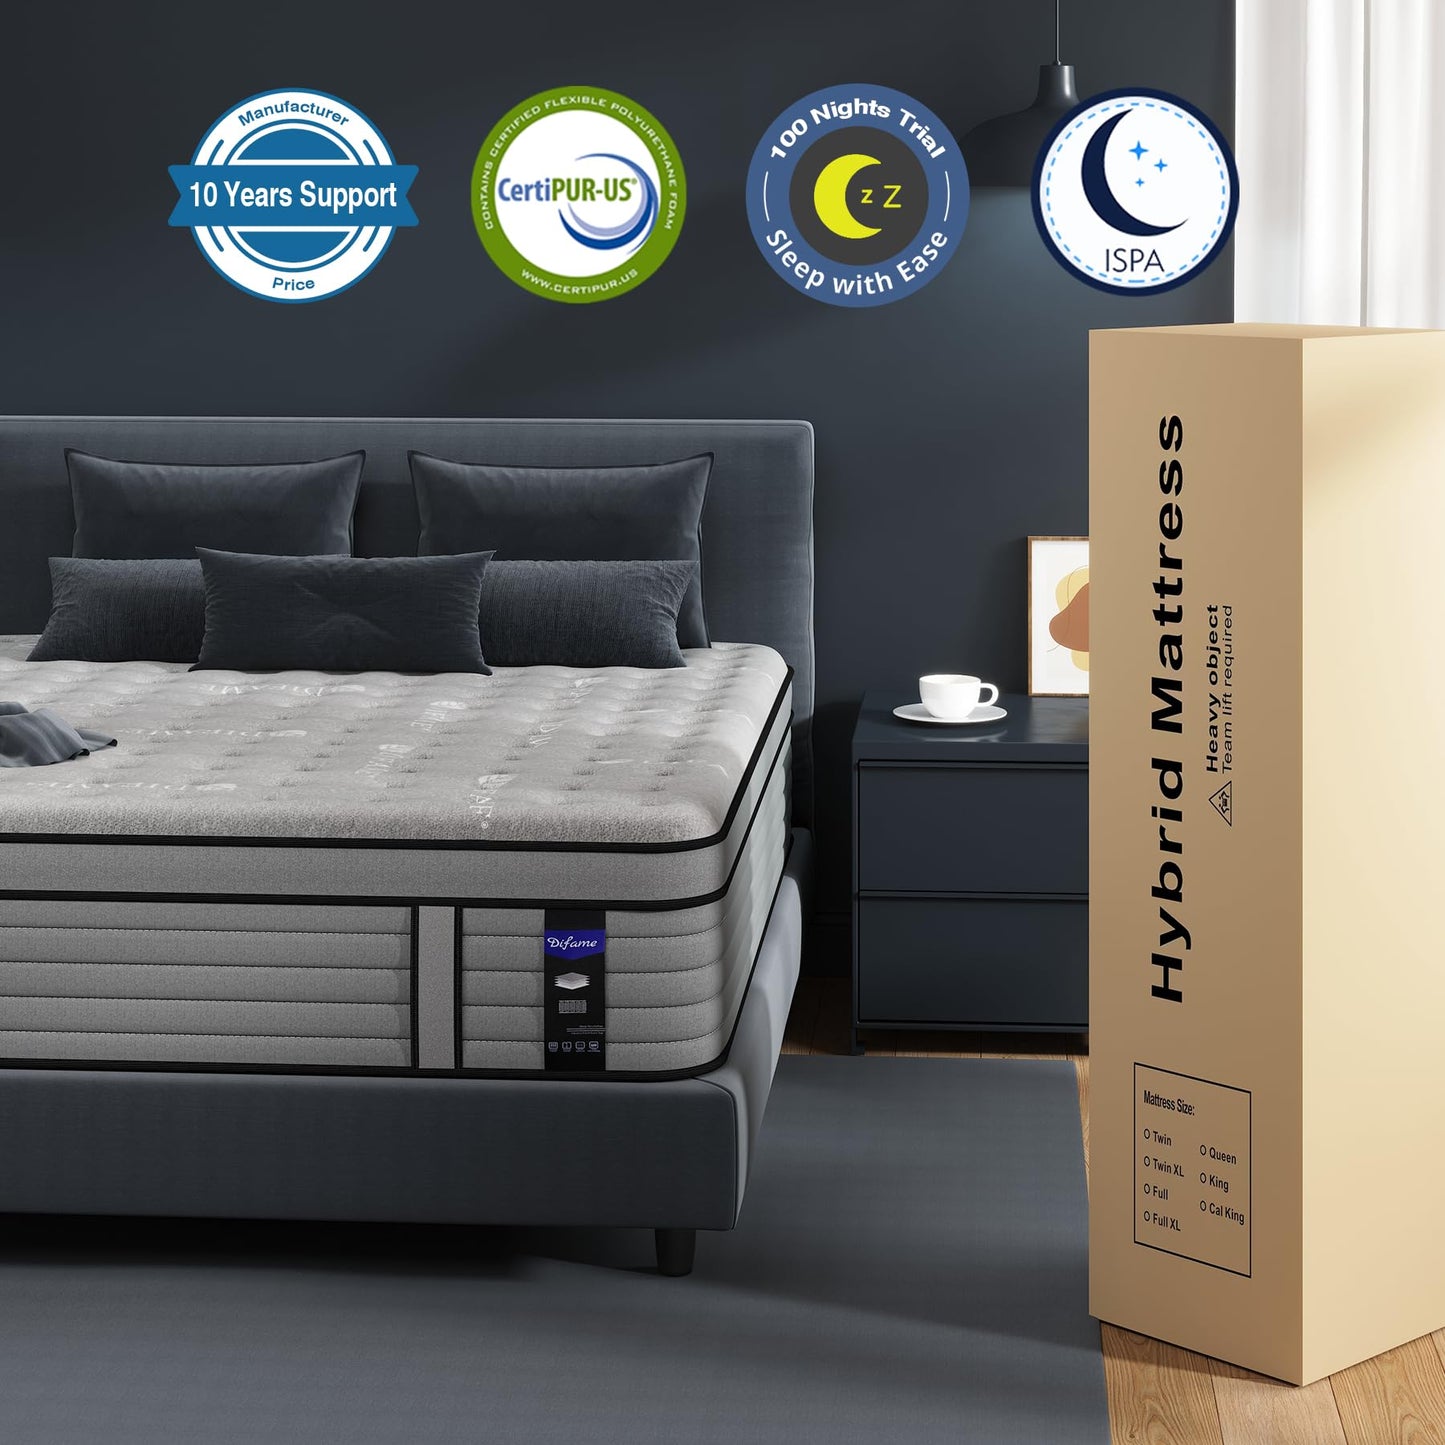 DIFAME California King Size Mattress, 12 Inch Hybrid Mattress with Memory Foam, Cal King Mattress in a Box, Individually Pocket Coils Spring for Motion Isolation, Edge Support, Medium Firm